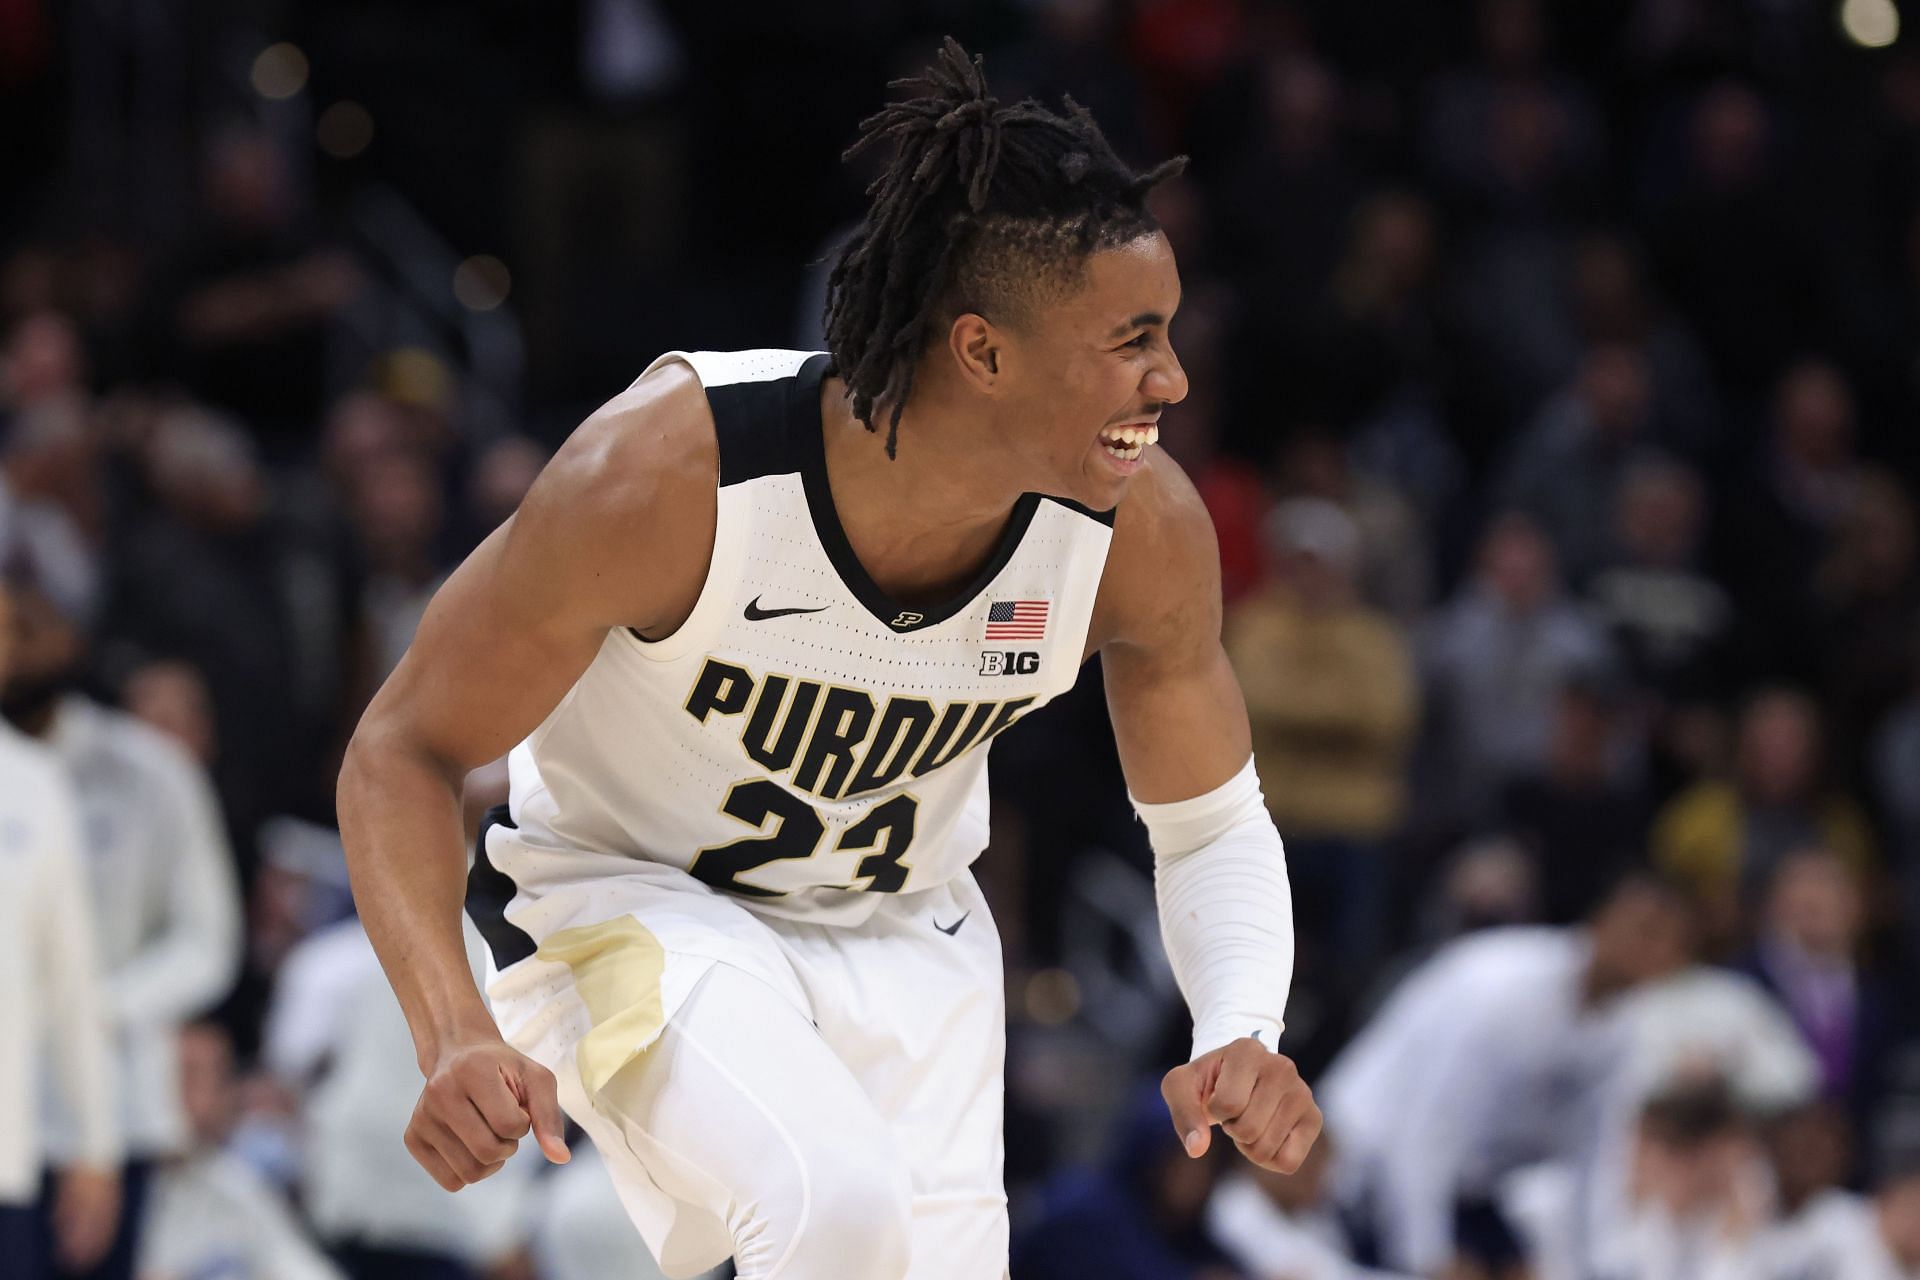 Jaden Ivey loves the game of basketball as Purdue continues its NCAA tournament run.